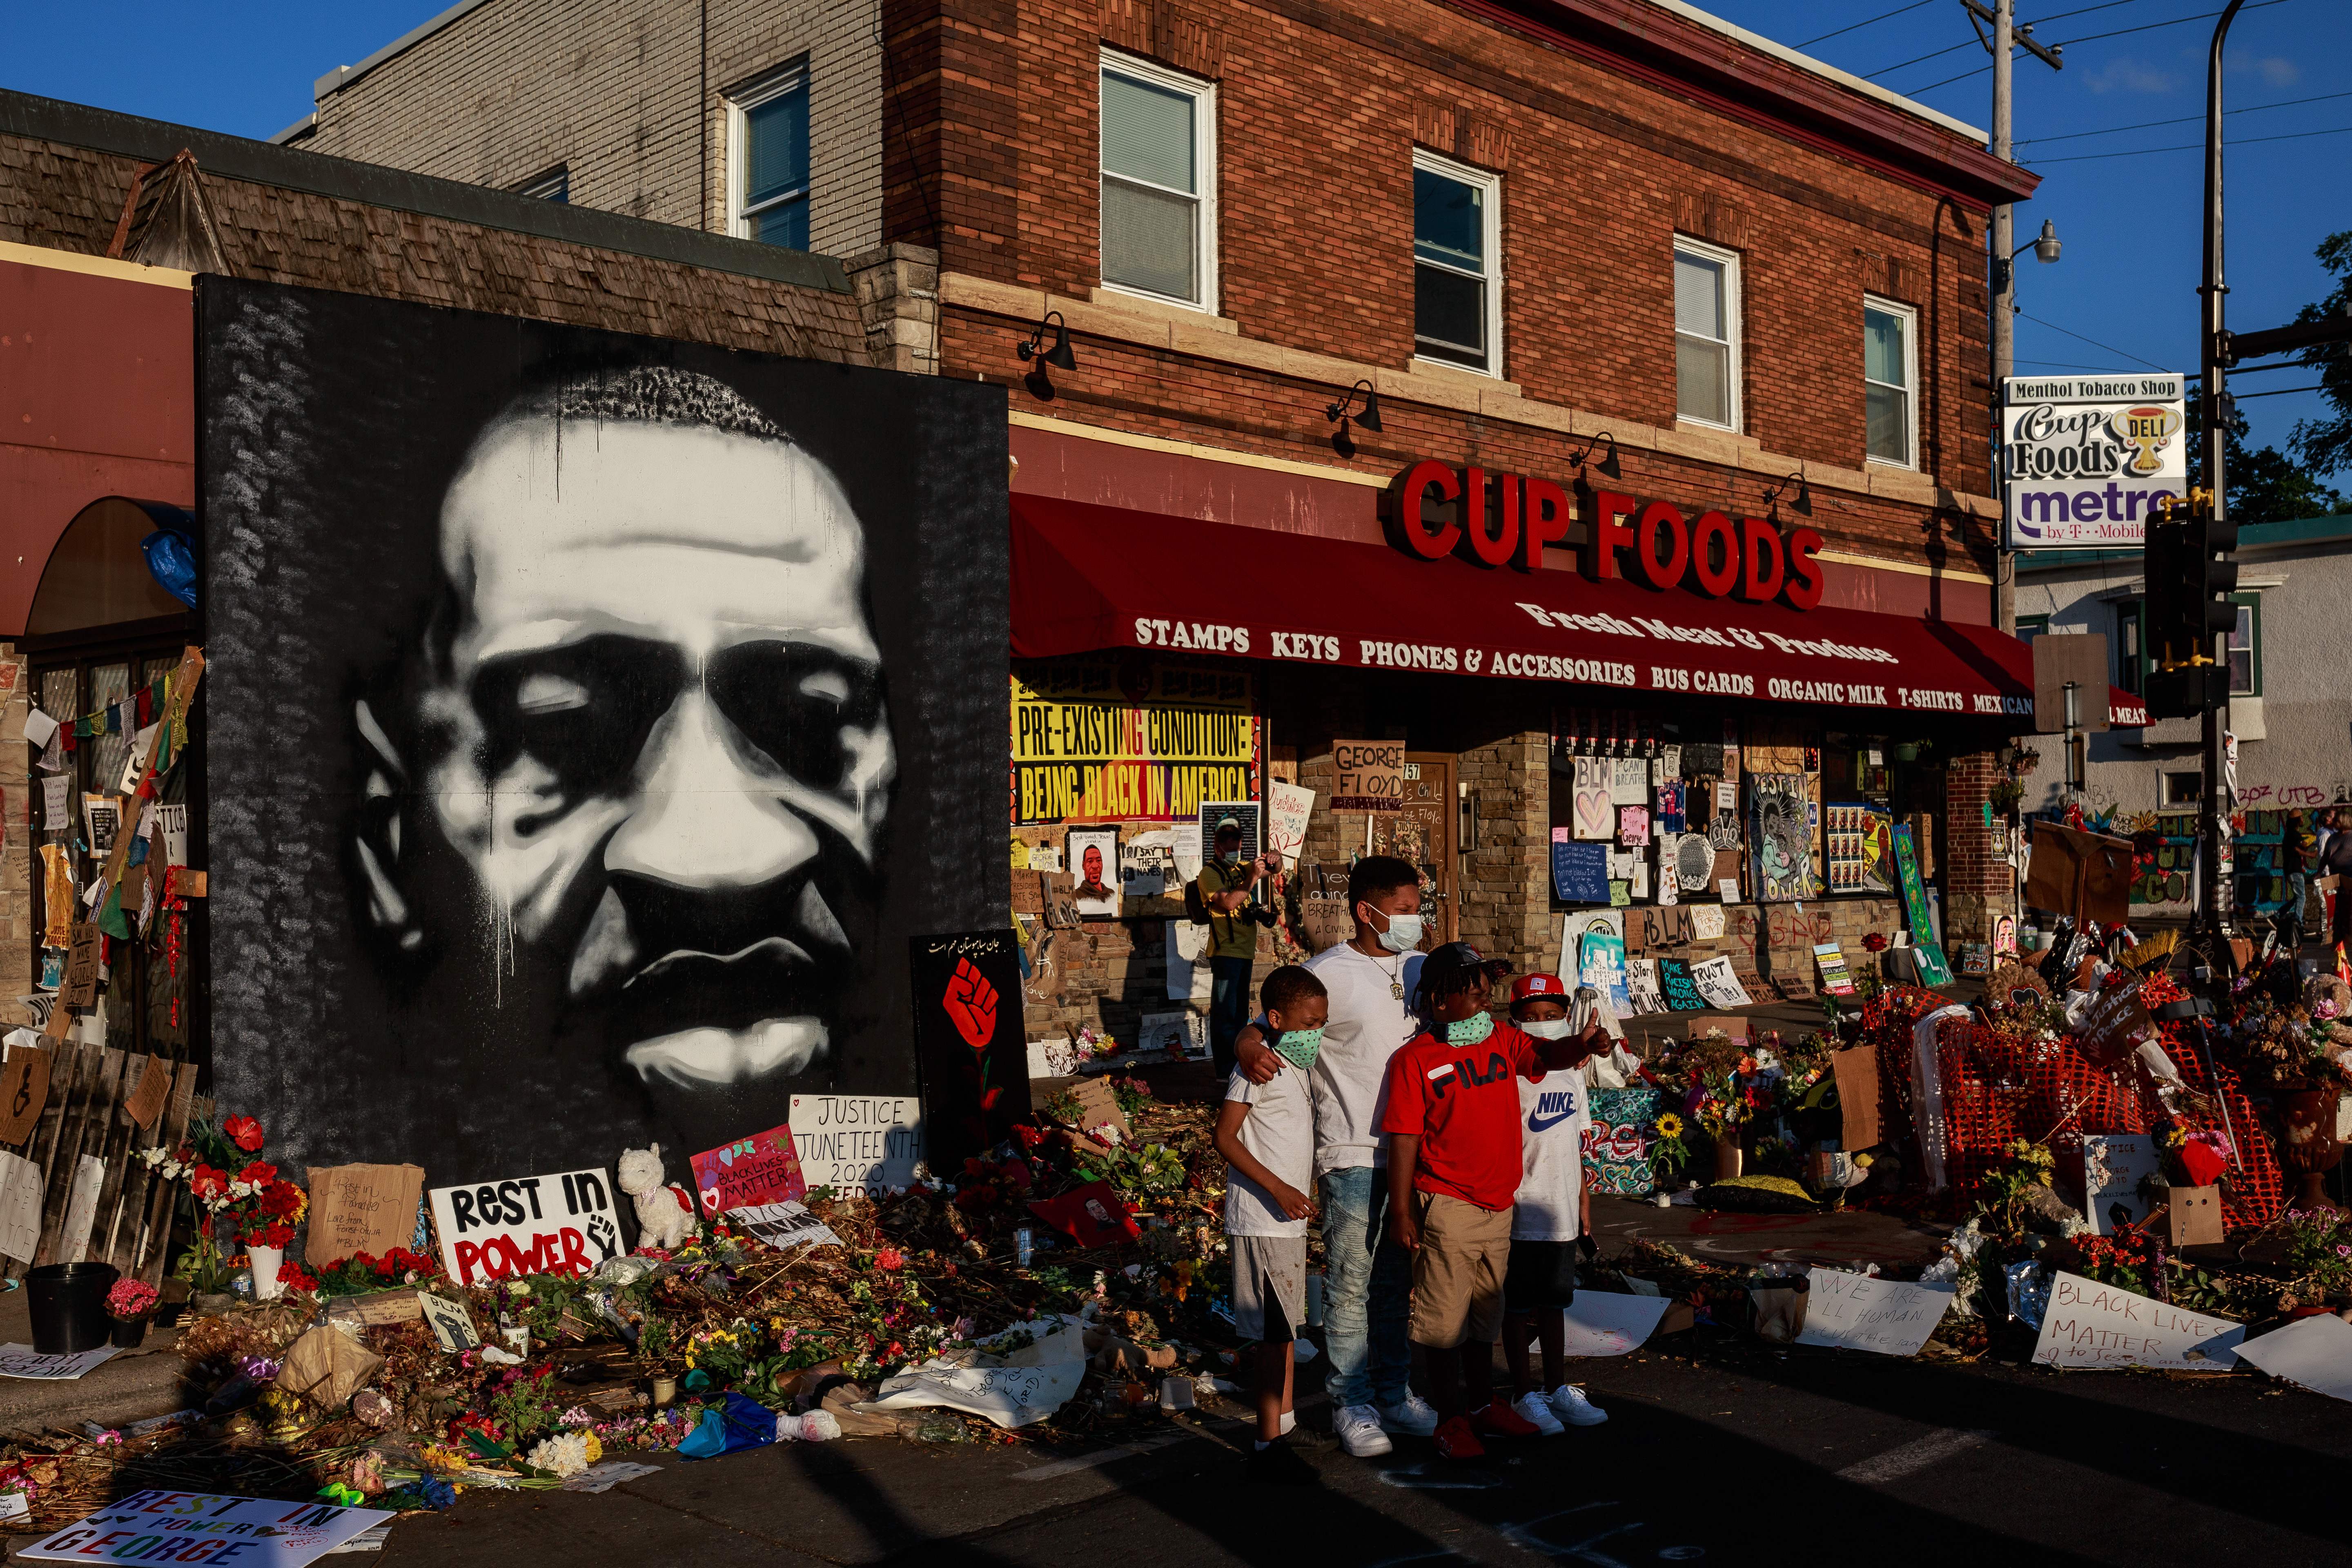 Kids pose as their father takes a photo in front of a makeshift memorial to George Floyd near the site where he died in police custody, in Minneapolis, Minnesota on June 20, 2020. (KEREM YUCEL/AFP via Getty Images)